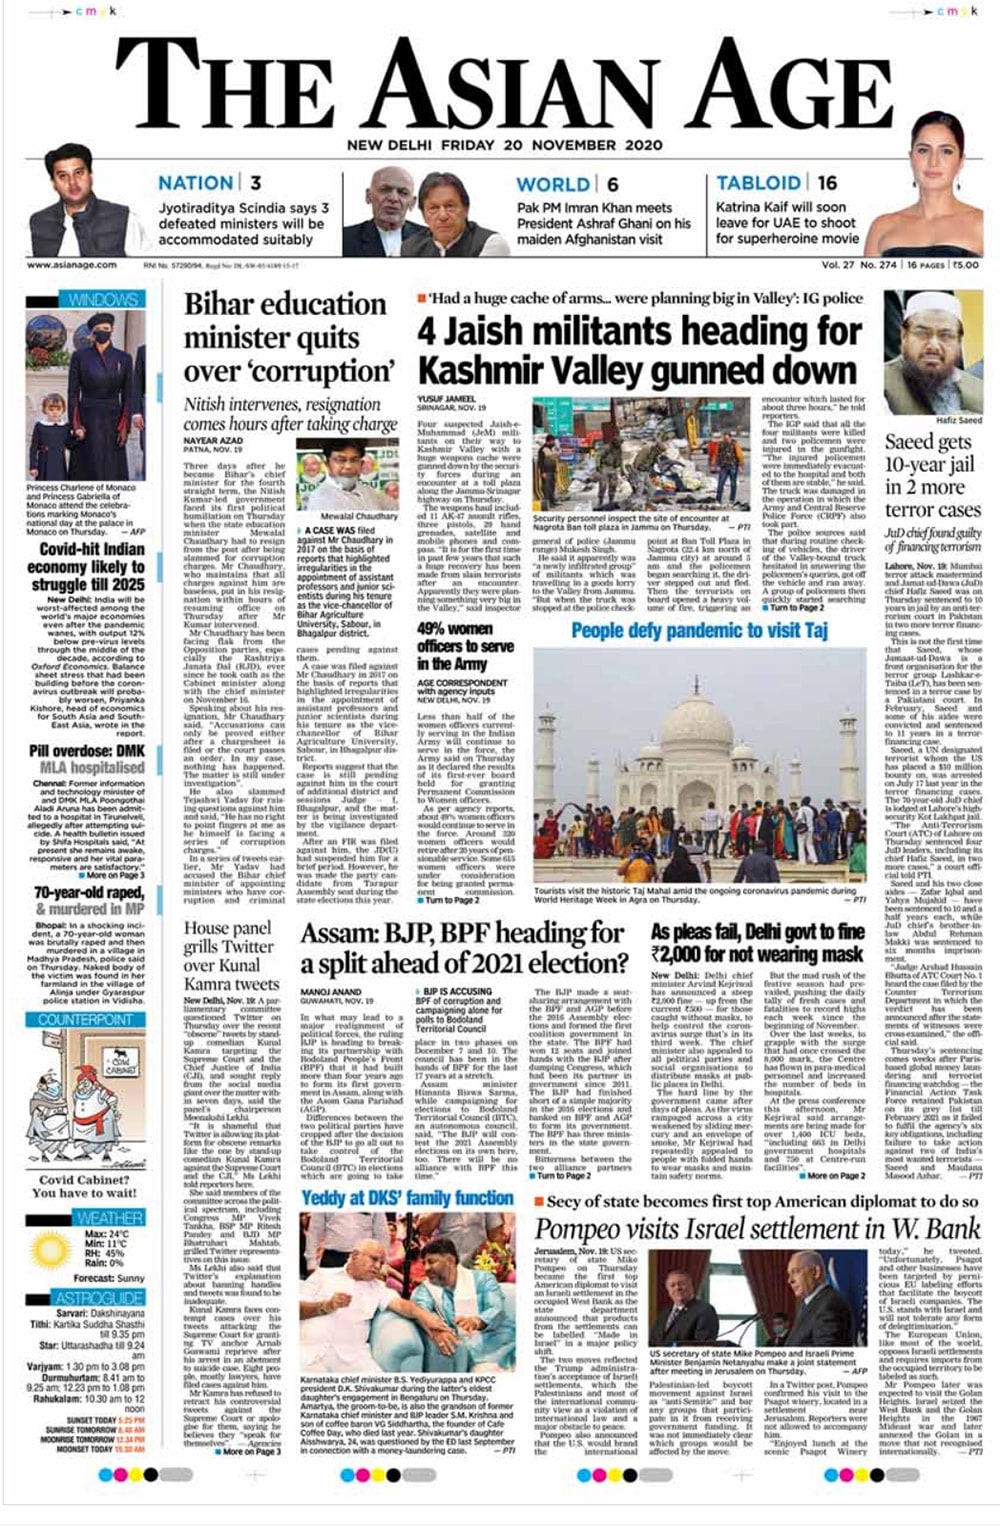 Newspaper Headlines: India Could Get Oxford Covid Vaccine By April 2021, Says Serum Institute Chief & Other Top Stories